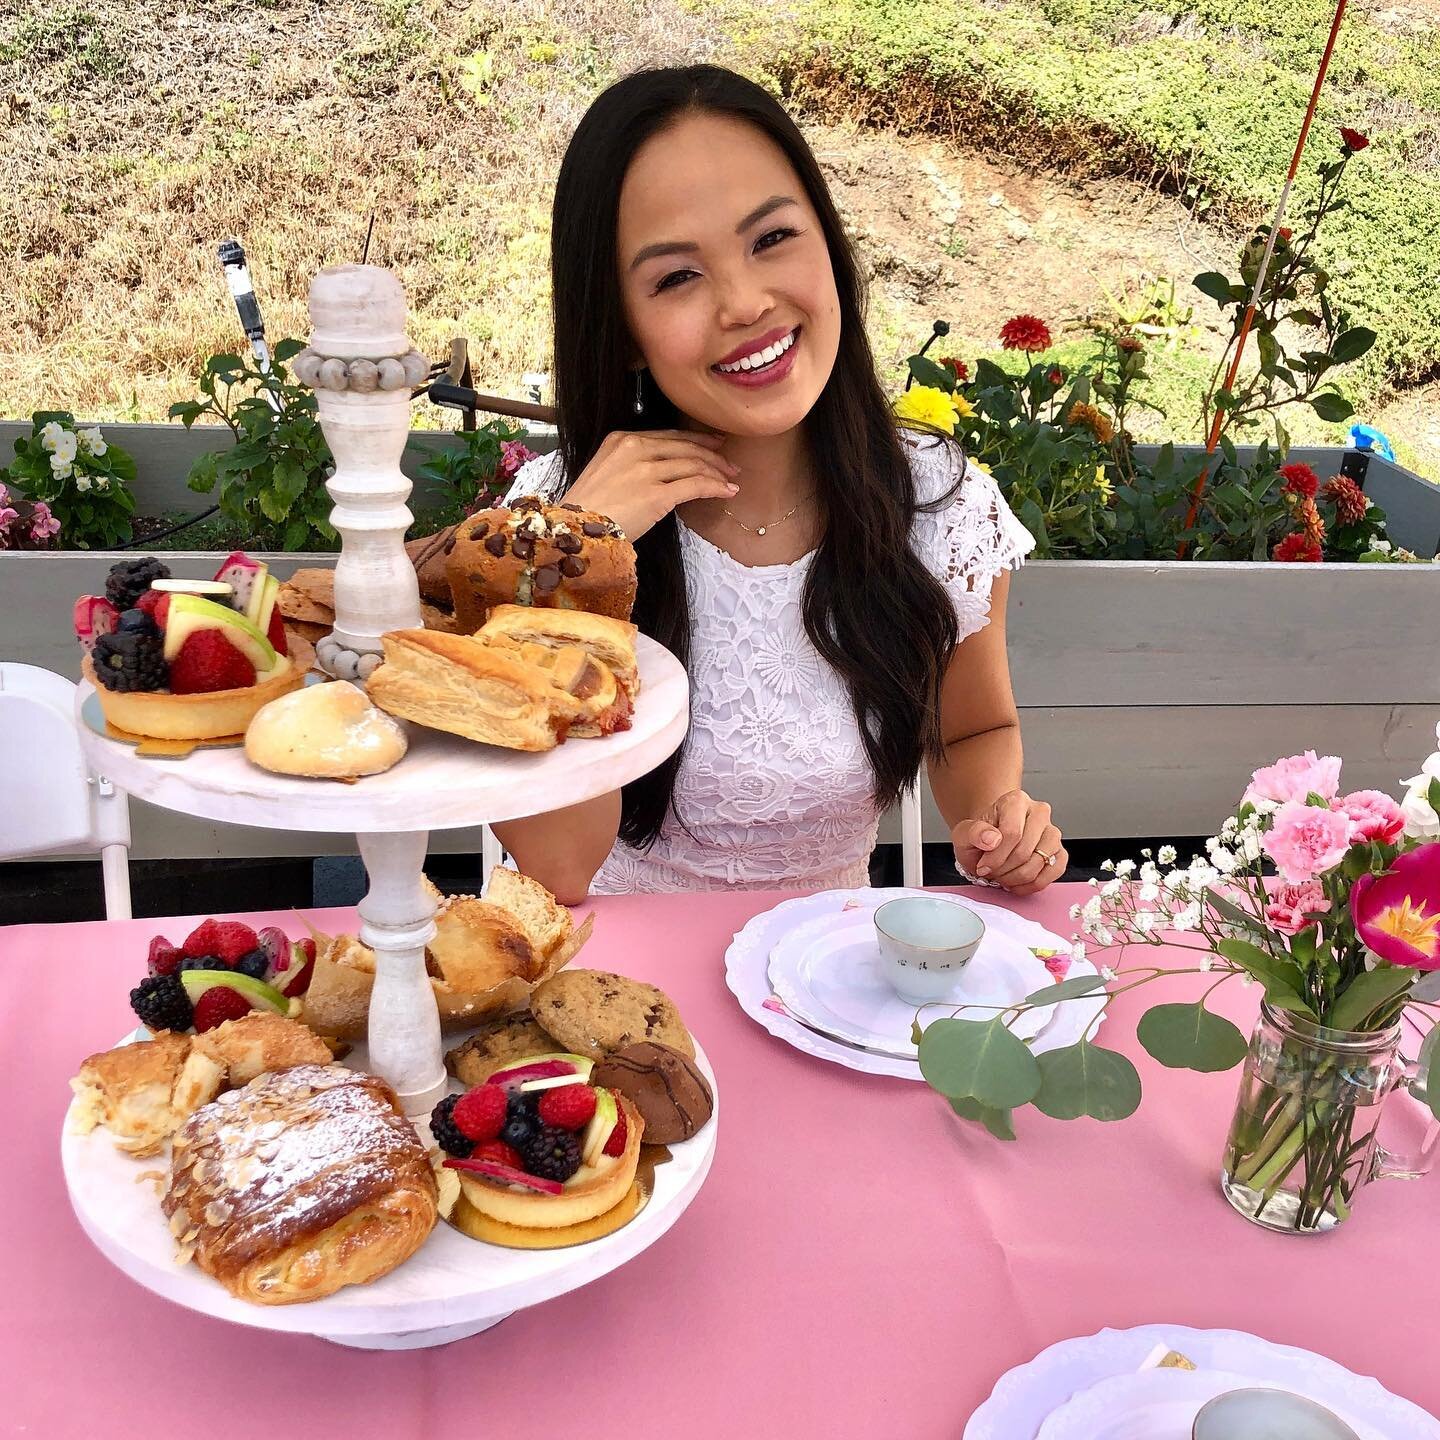 What a fun tea party bridal shower 🫖 🌸 🤗💕 Thank you to all the beautiful women who came out to celebrate my last month as a SooHoo! I loved having my family and friends from all walks of life with me, come together for this special moment. From e